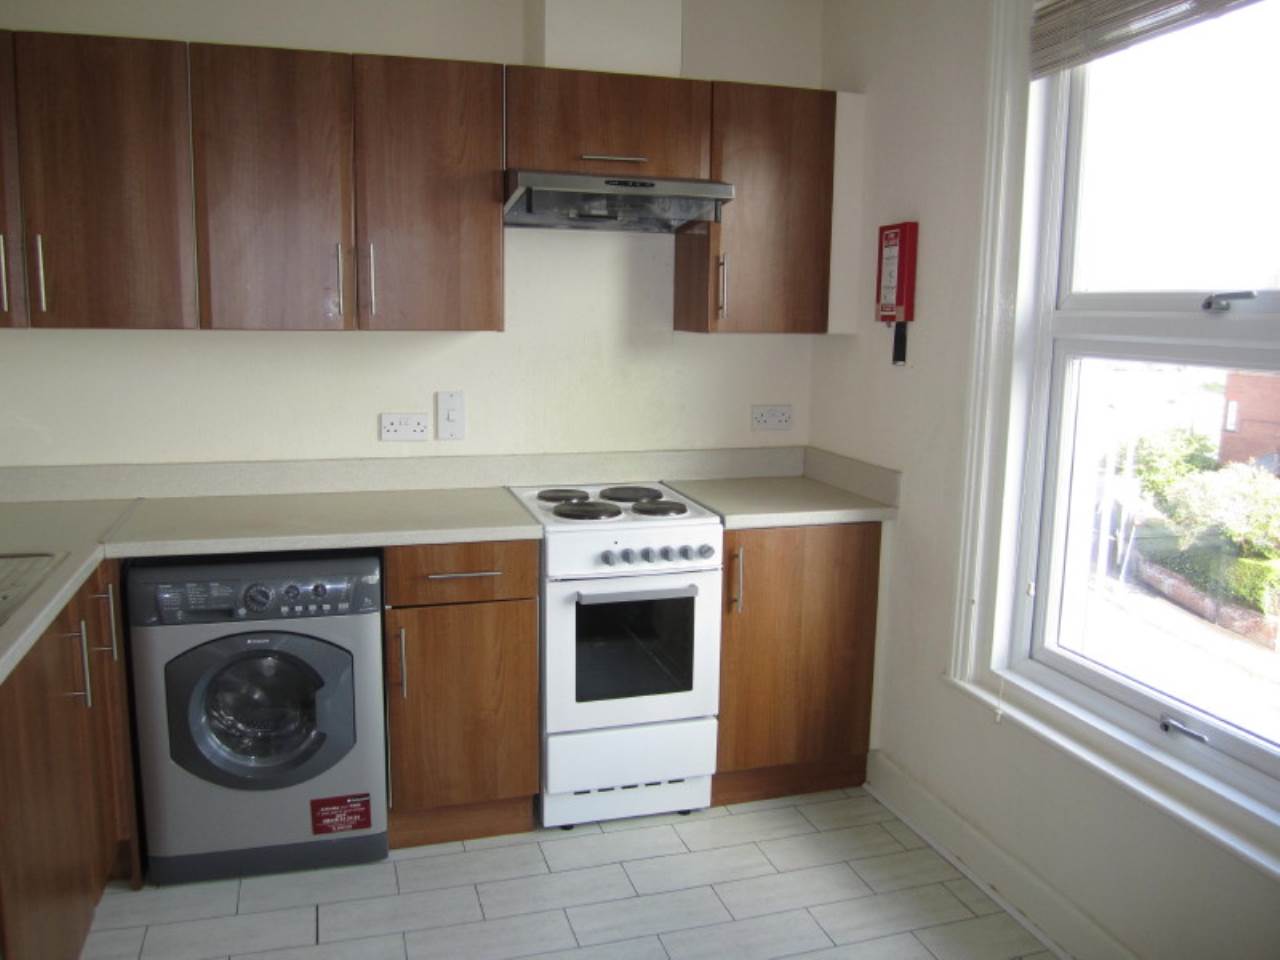 1 bed flat to rent in Old Tiverton Road, EX4 